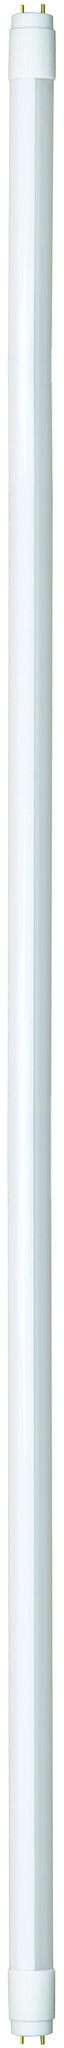 167371 - EcoWatts - Tube LED T8 G13 120cm 20W 4000K 1800Lm  The Lampco - The Lamp Company